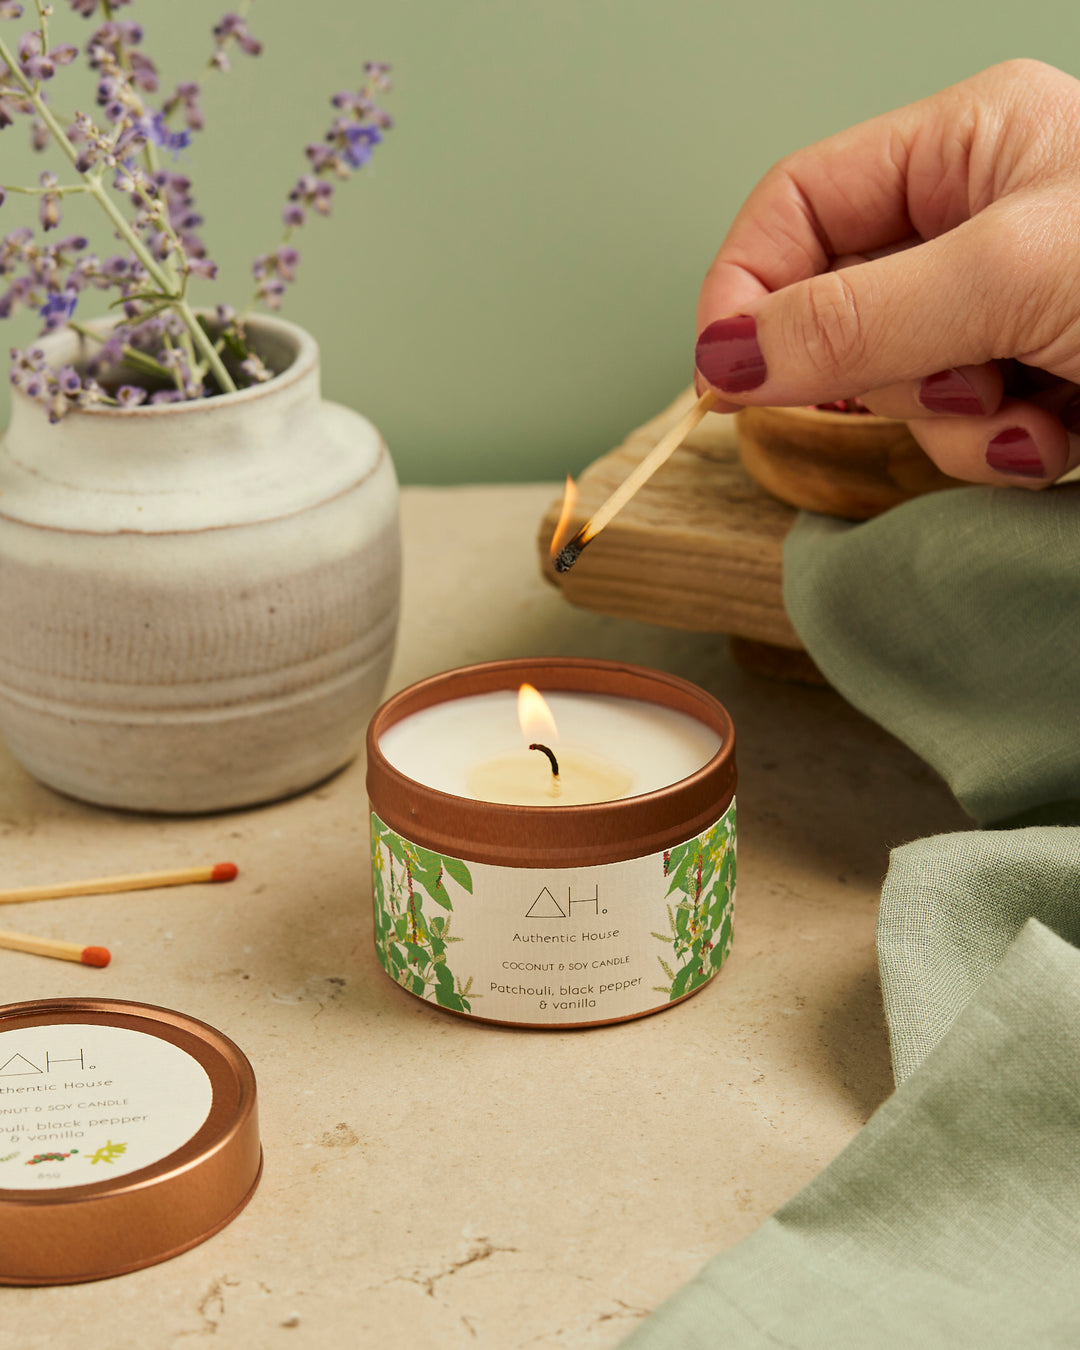 Patchouli candle being lit with match